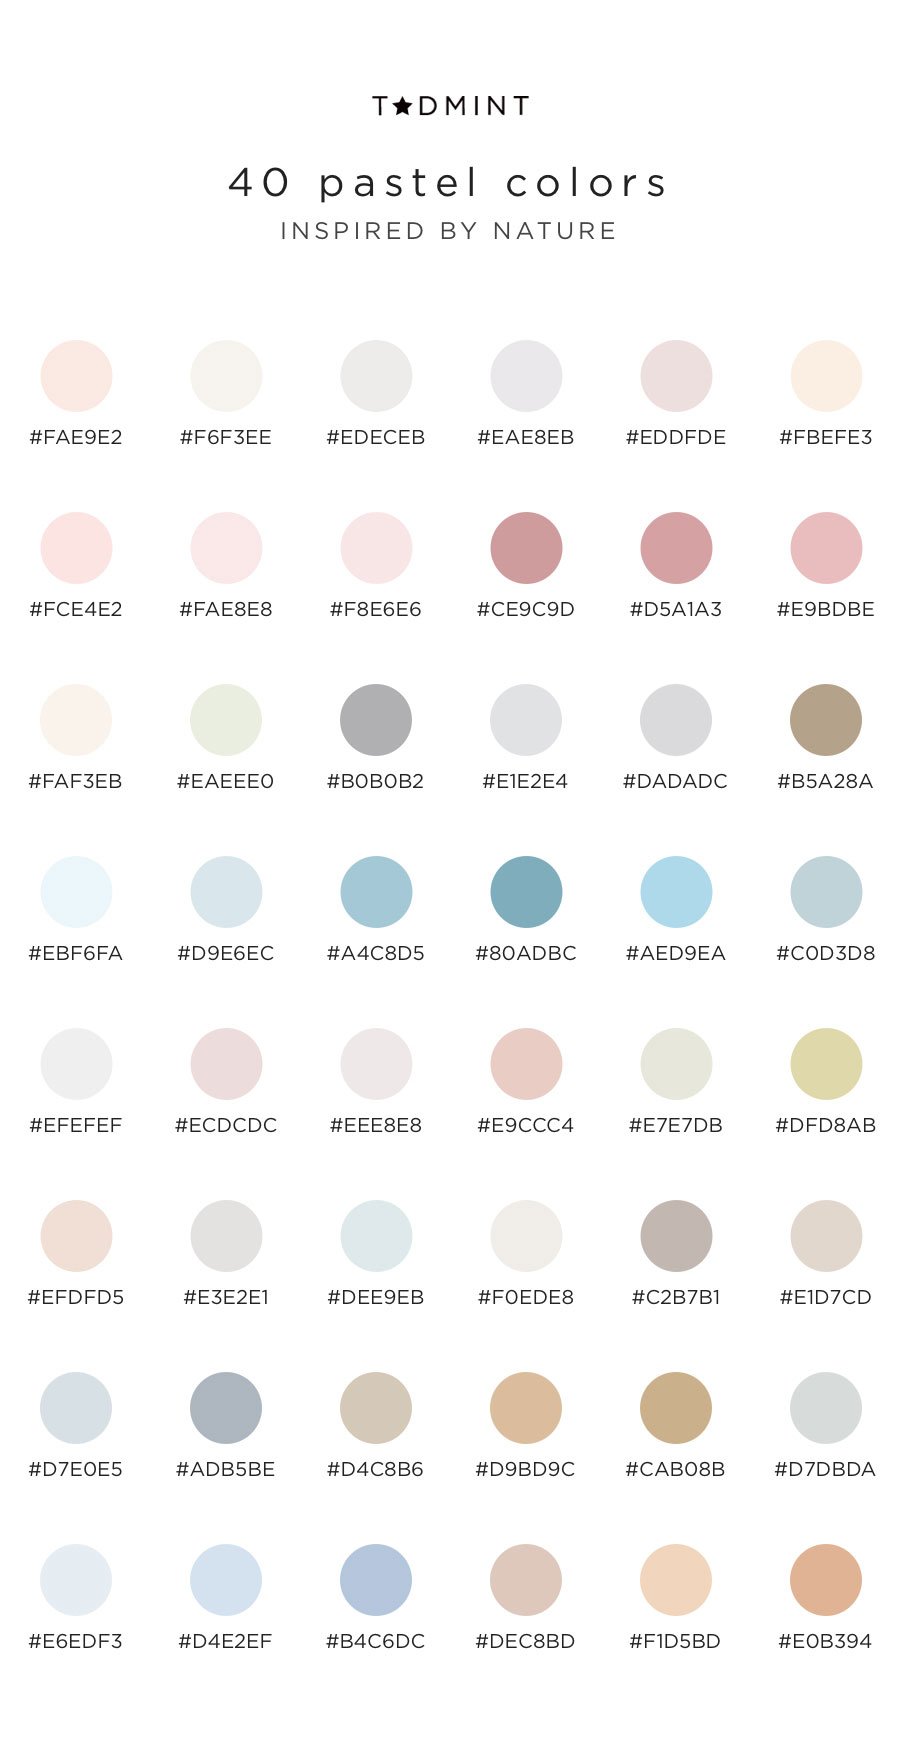 8 Pastel Color Palettes Inspired by Nature — TADMINT — Design